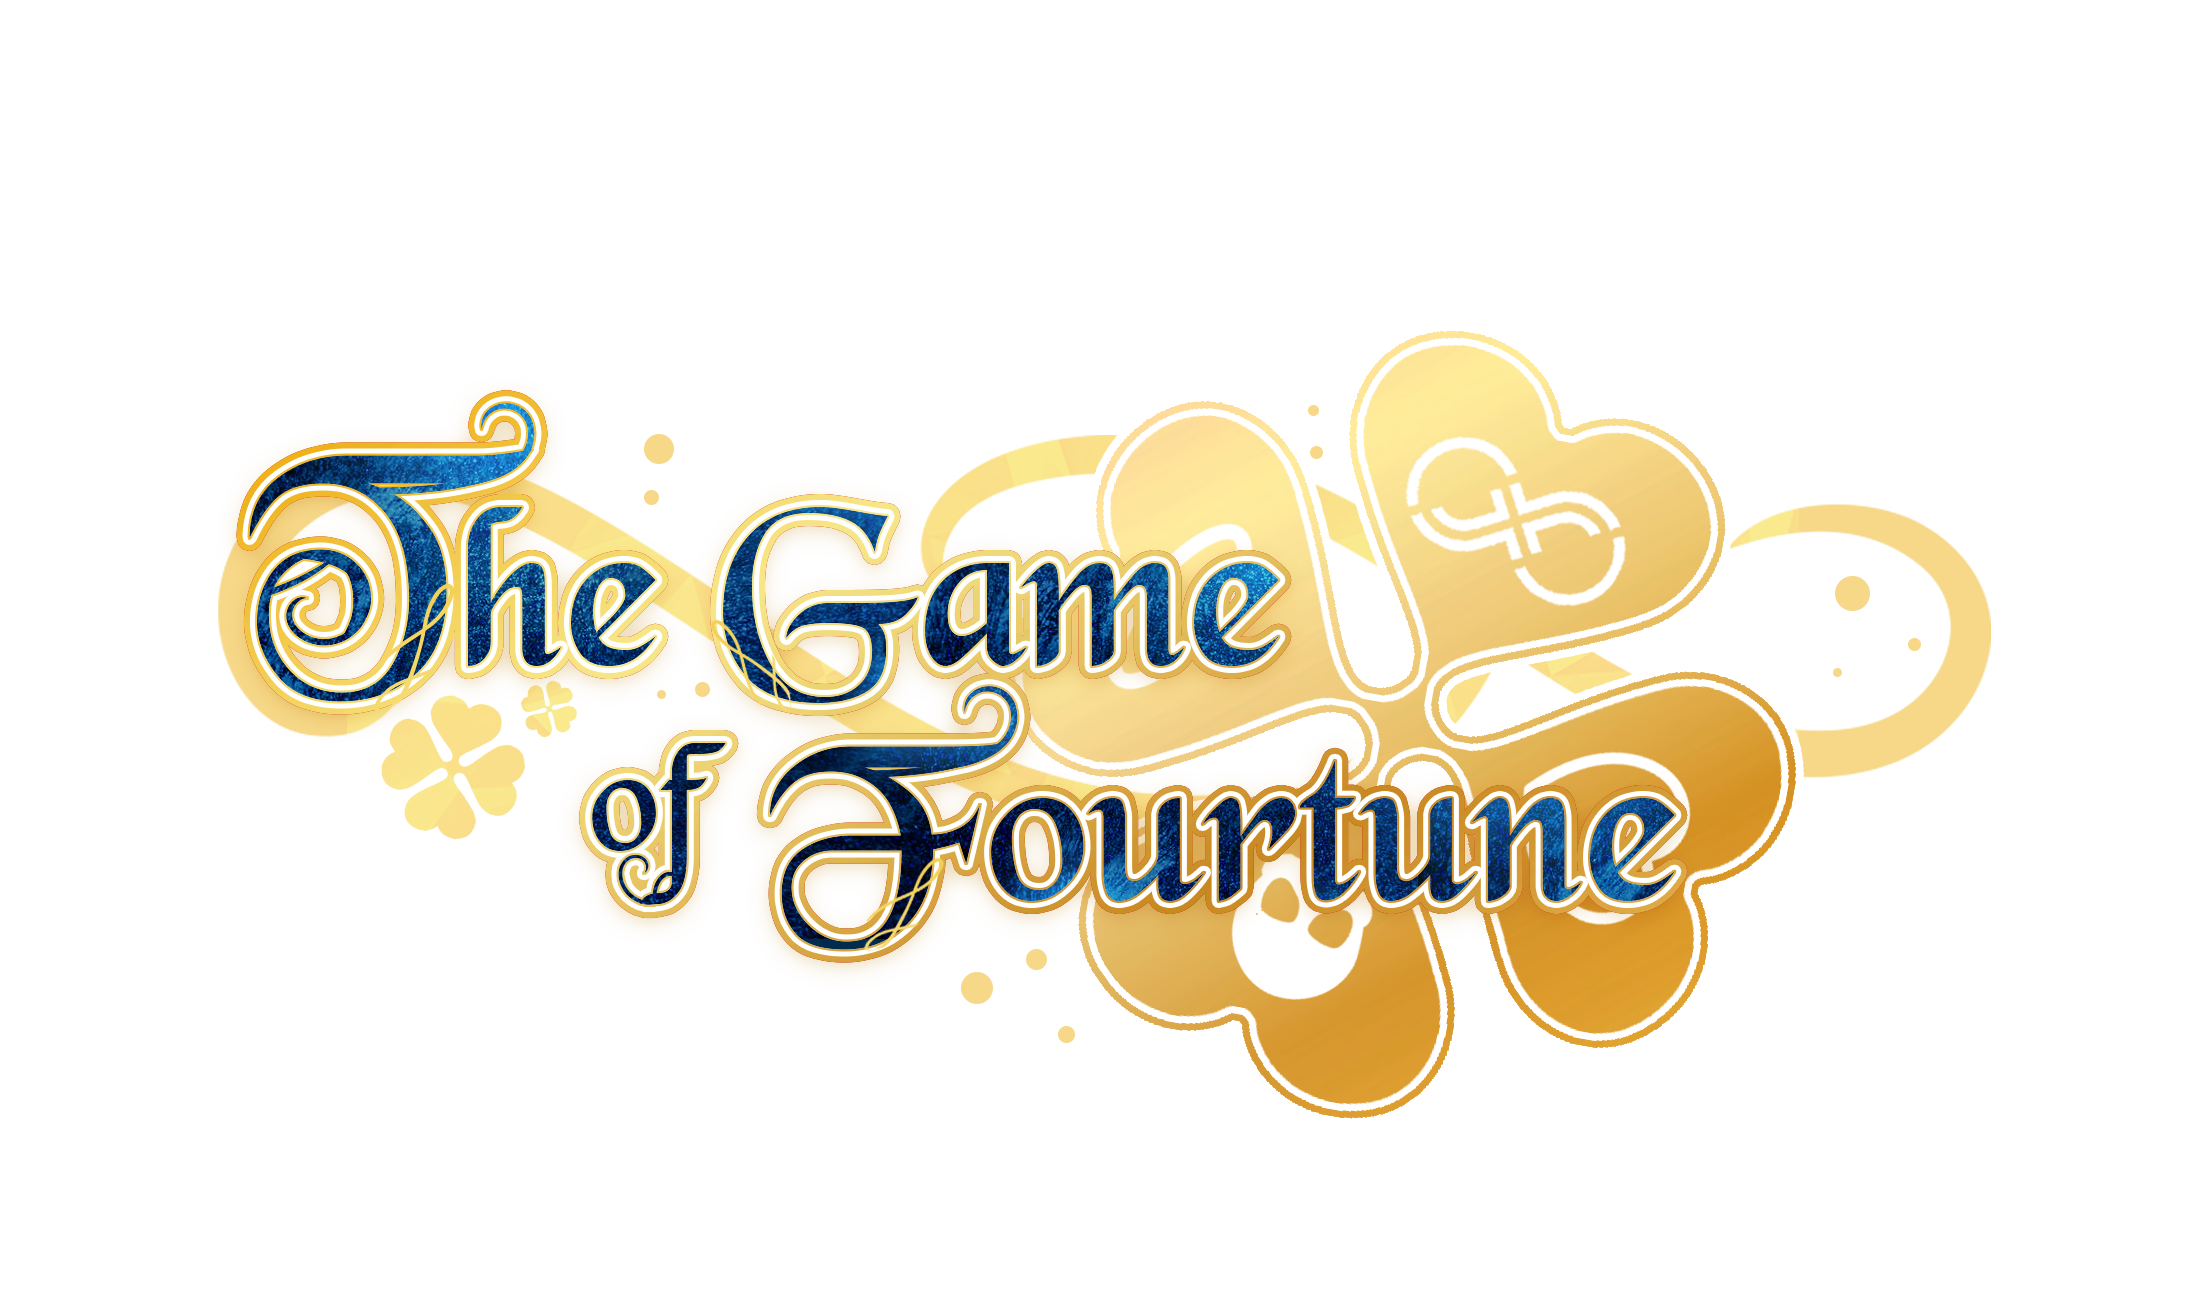 The Game of Fourtune